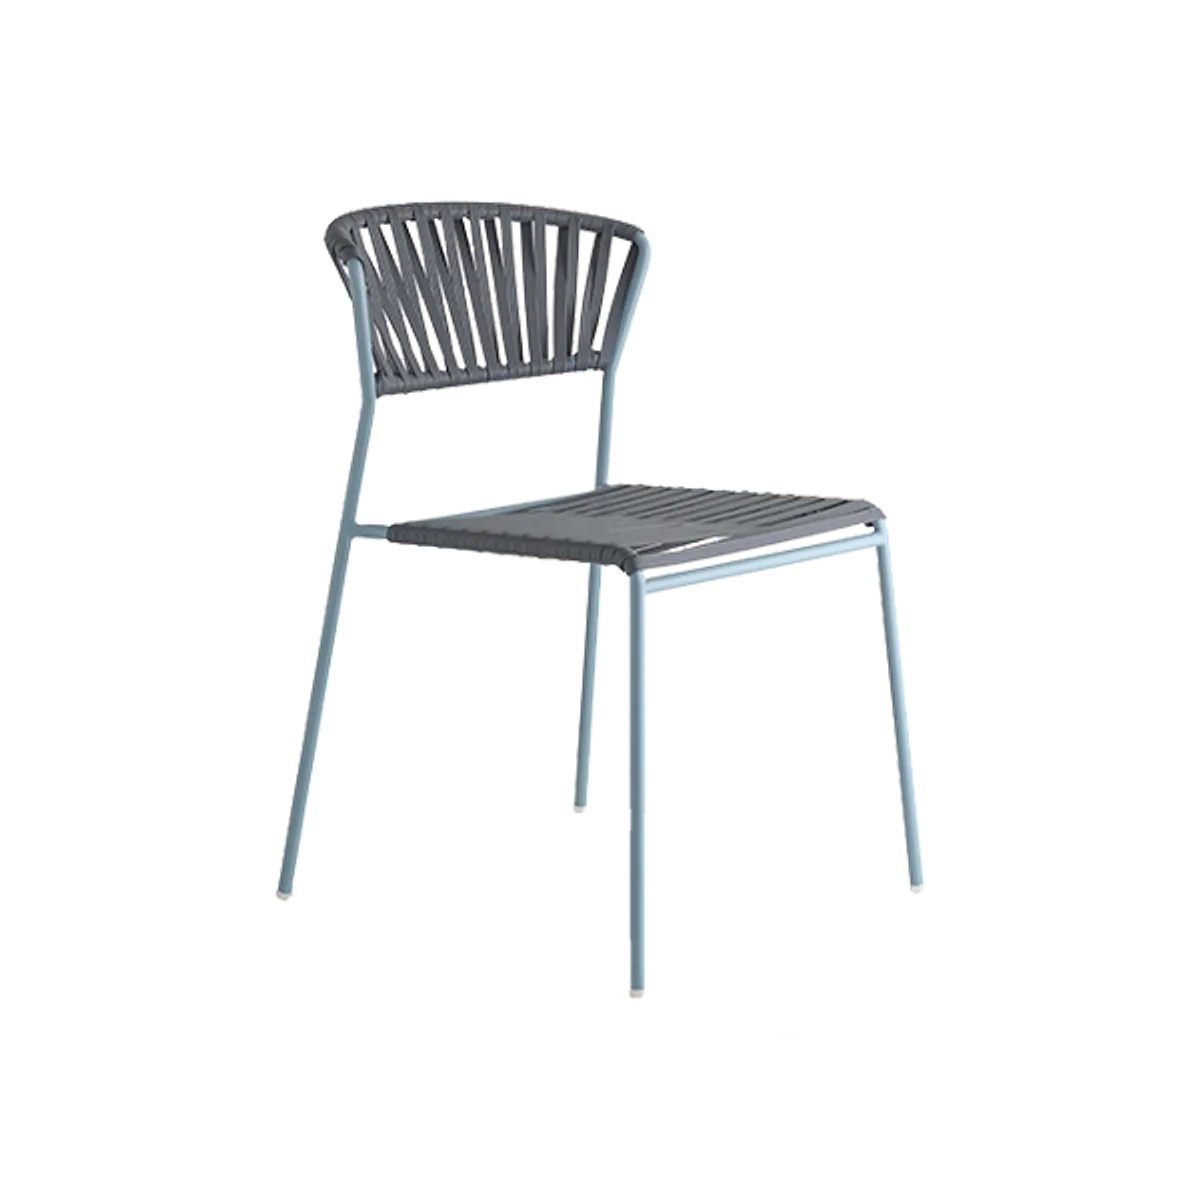 Web Robyn Pvc Exterior Chair For Commercial Use Inside Out Contracts